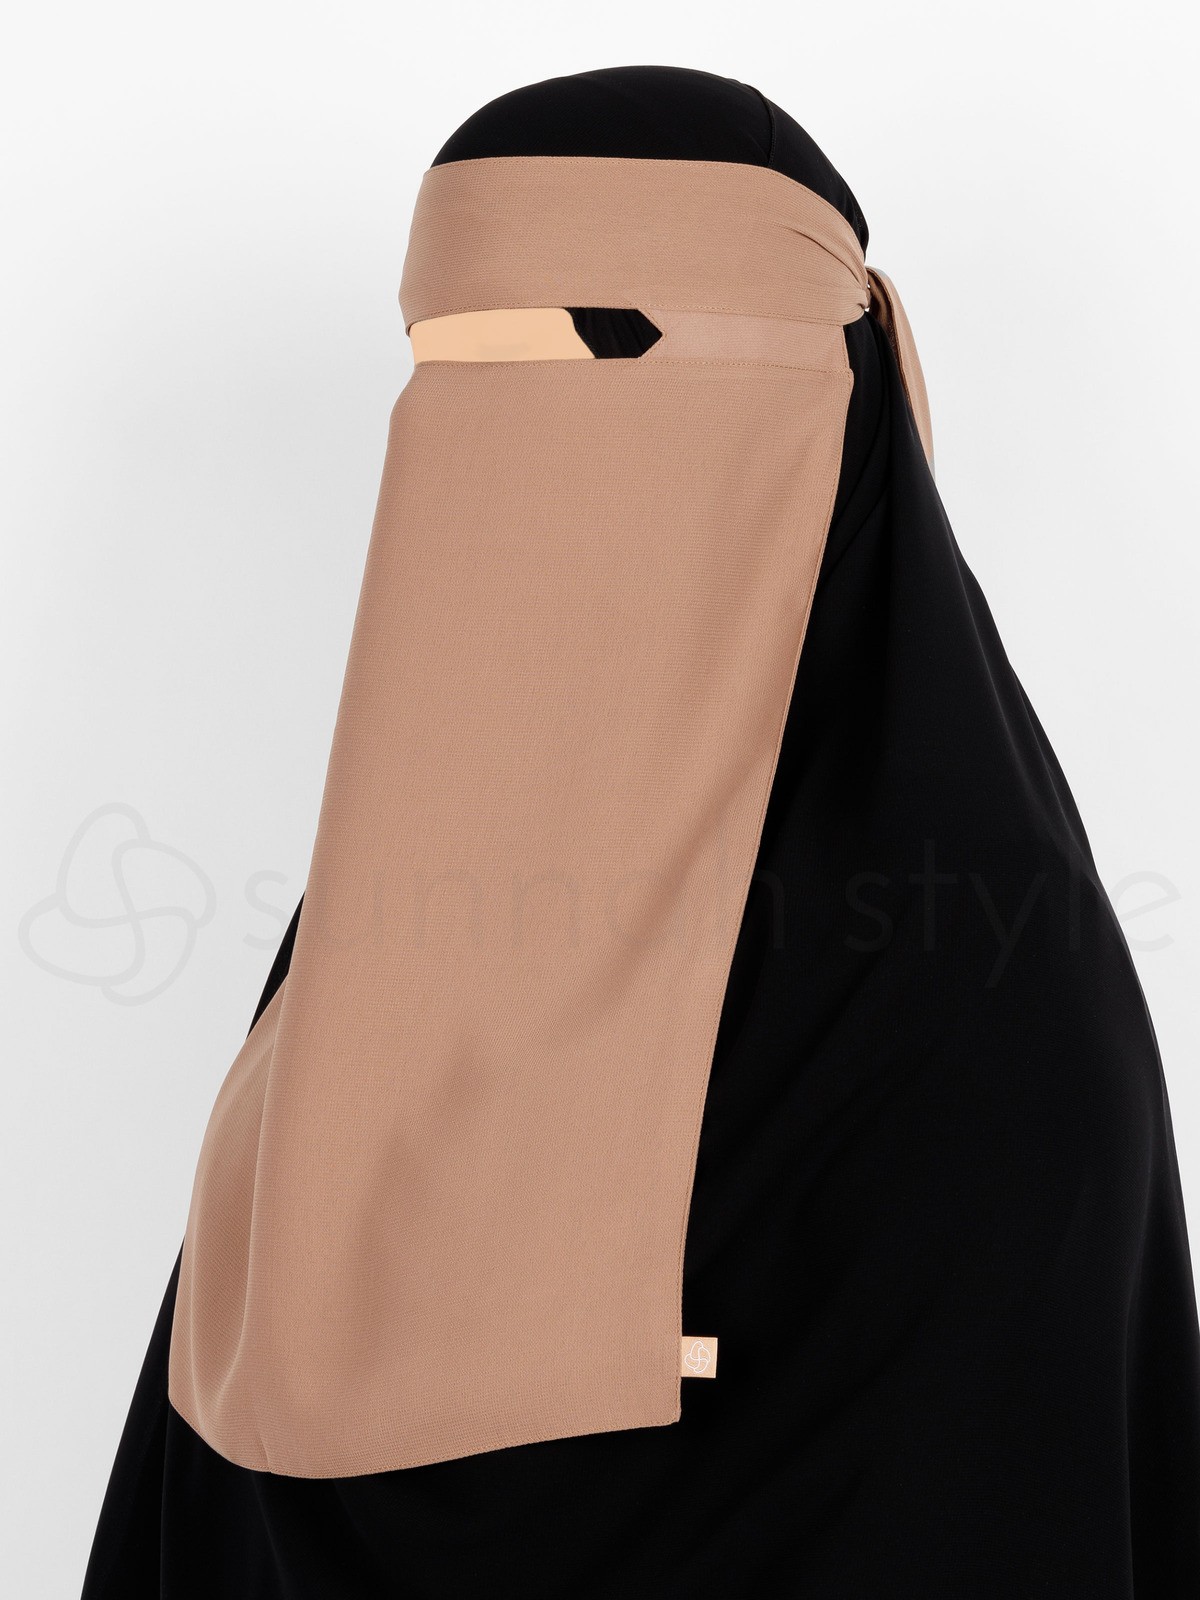 Sunnah Style - No-Pinch One Layer Niqab (Toffee)